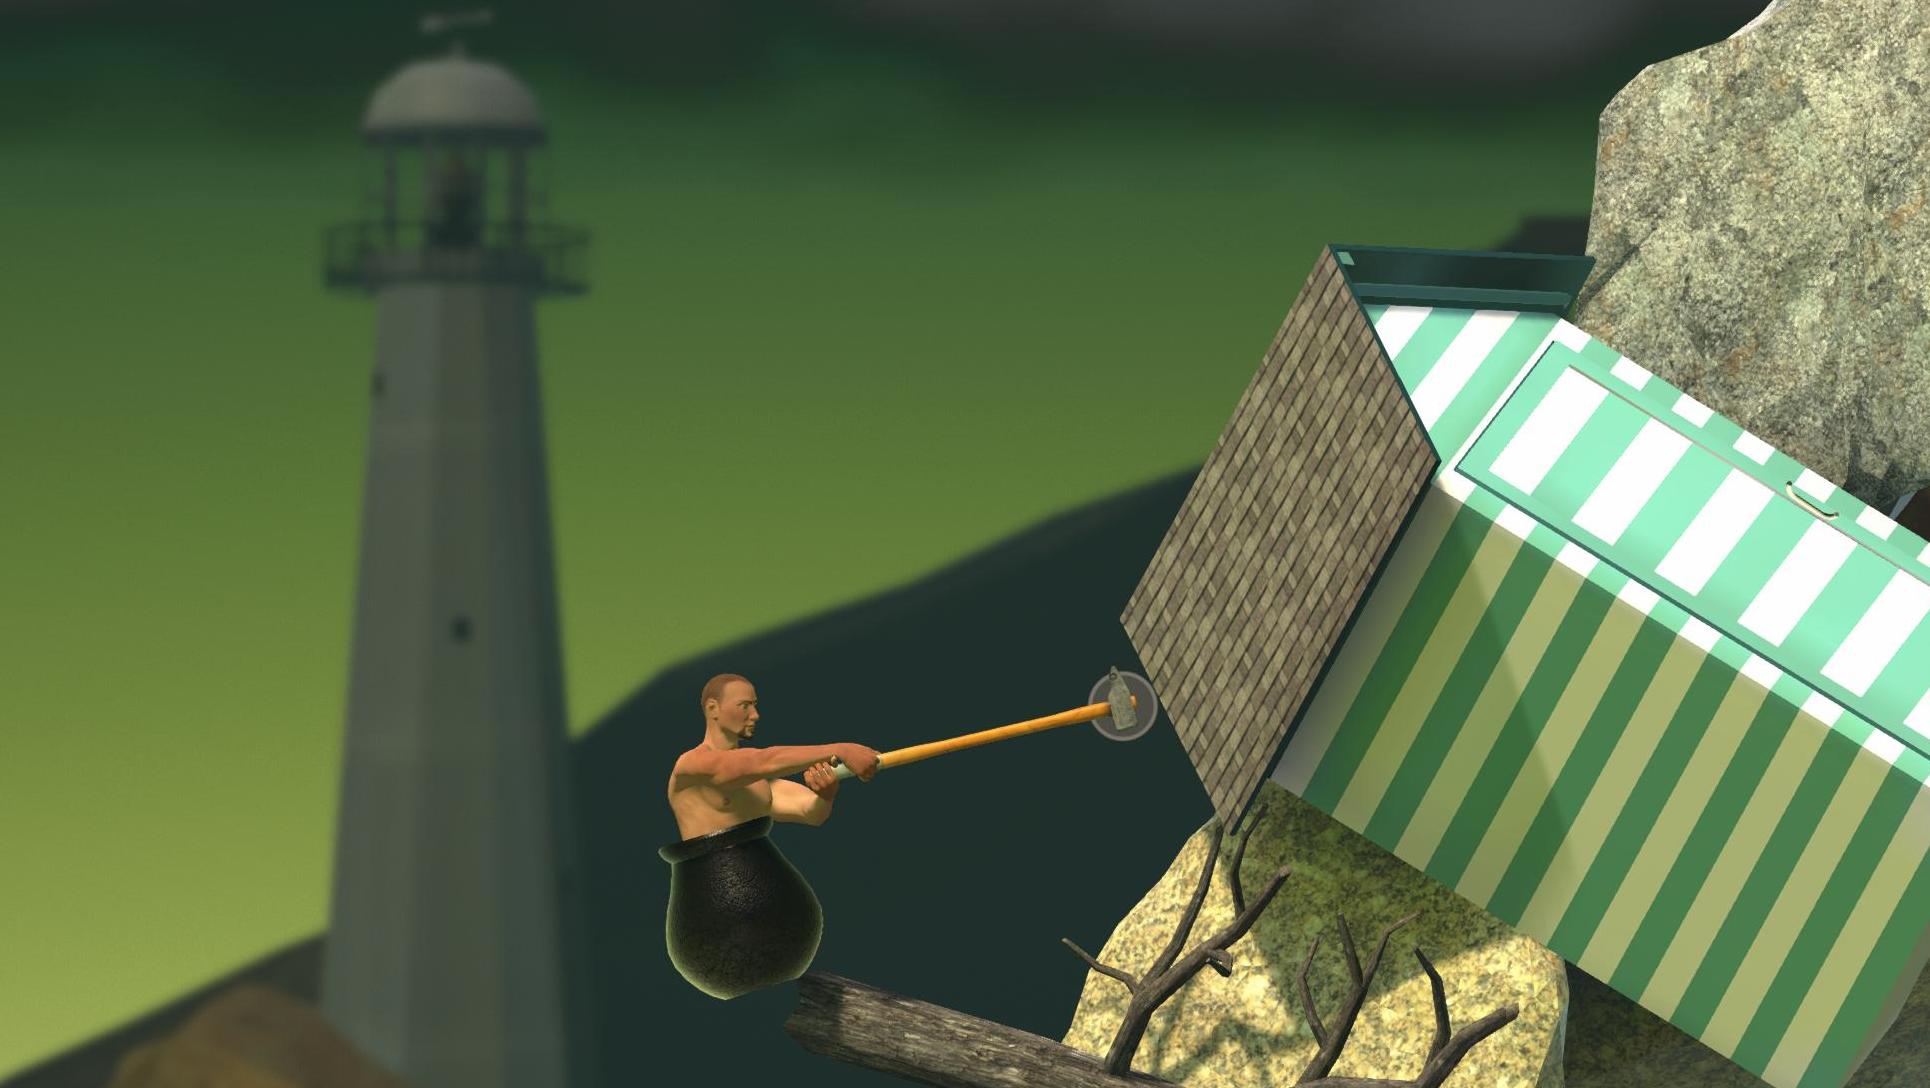 Getting Over It With Bennett Foddy Teleport Mod Easy Mode